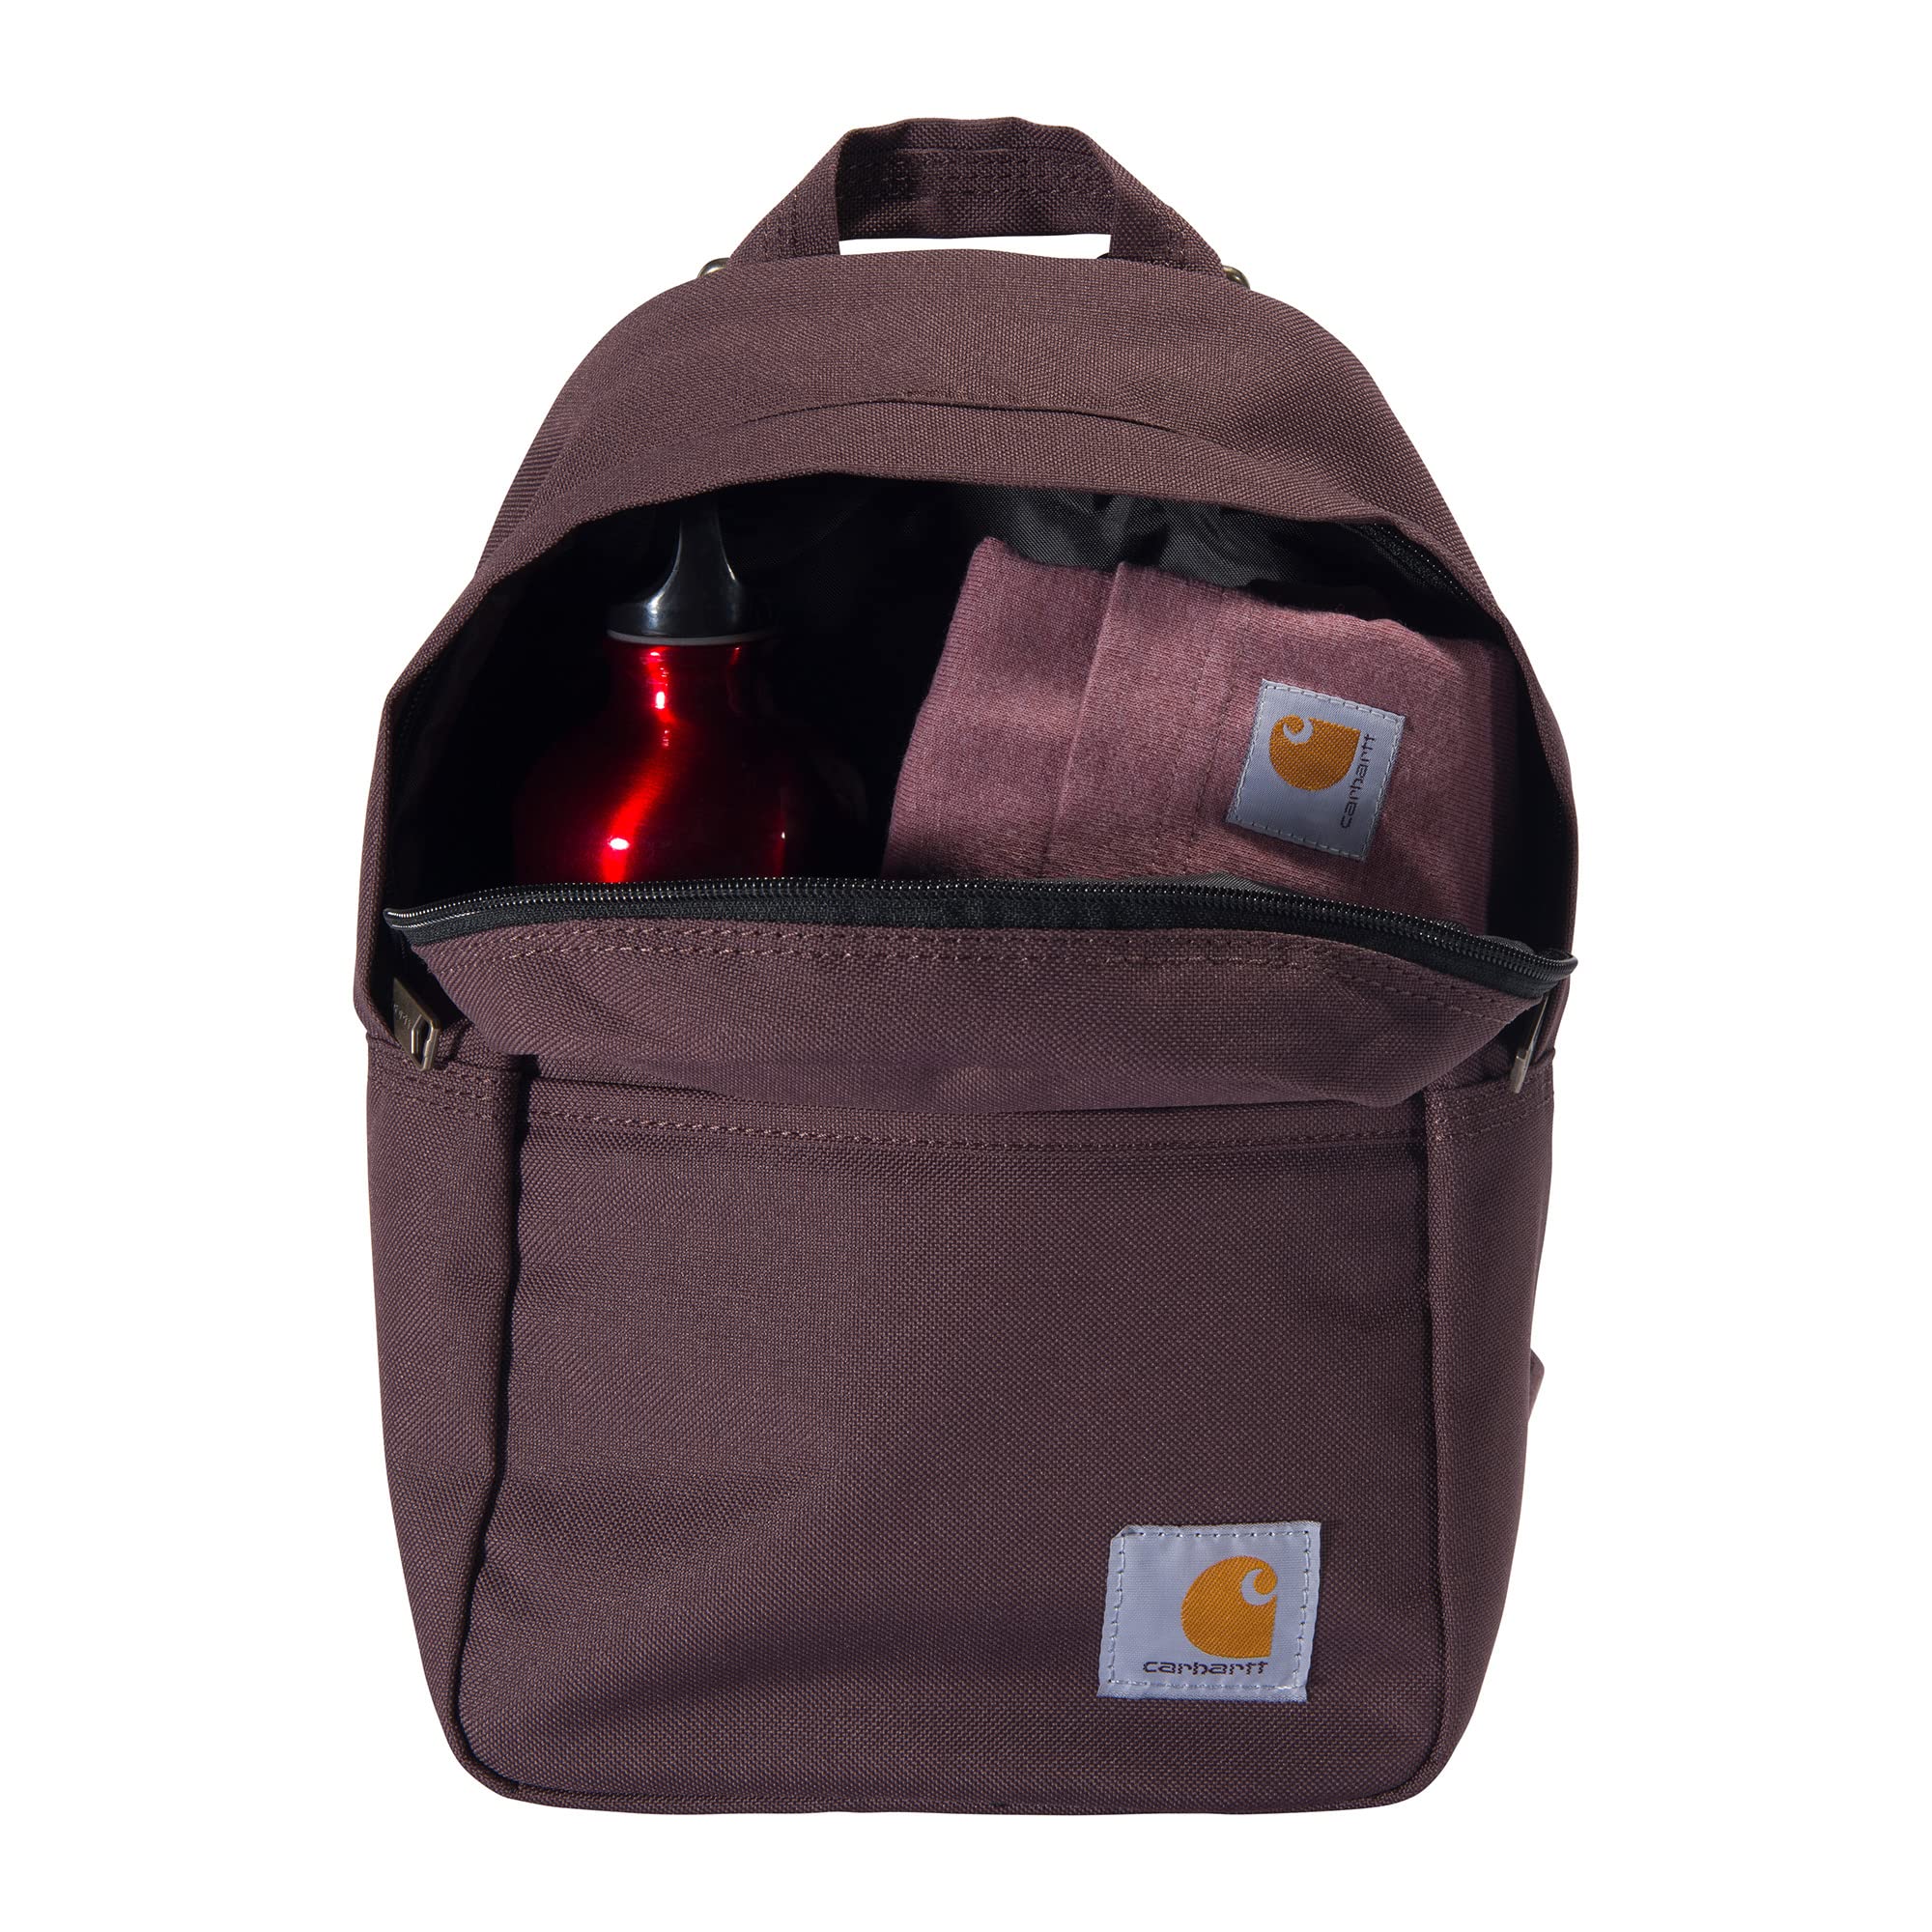 Carhartt Classic Mini Backpack, Durable, Water-Resistant Backpack with Adjustable Shoulder Straps, Wine